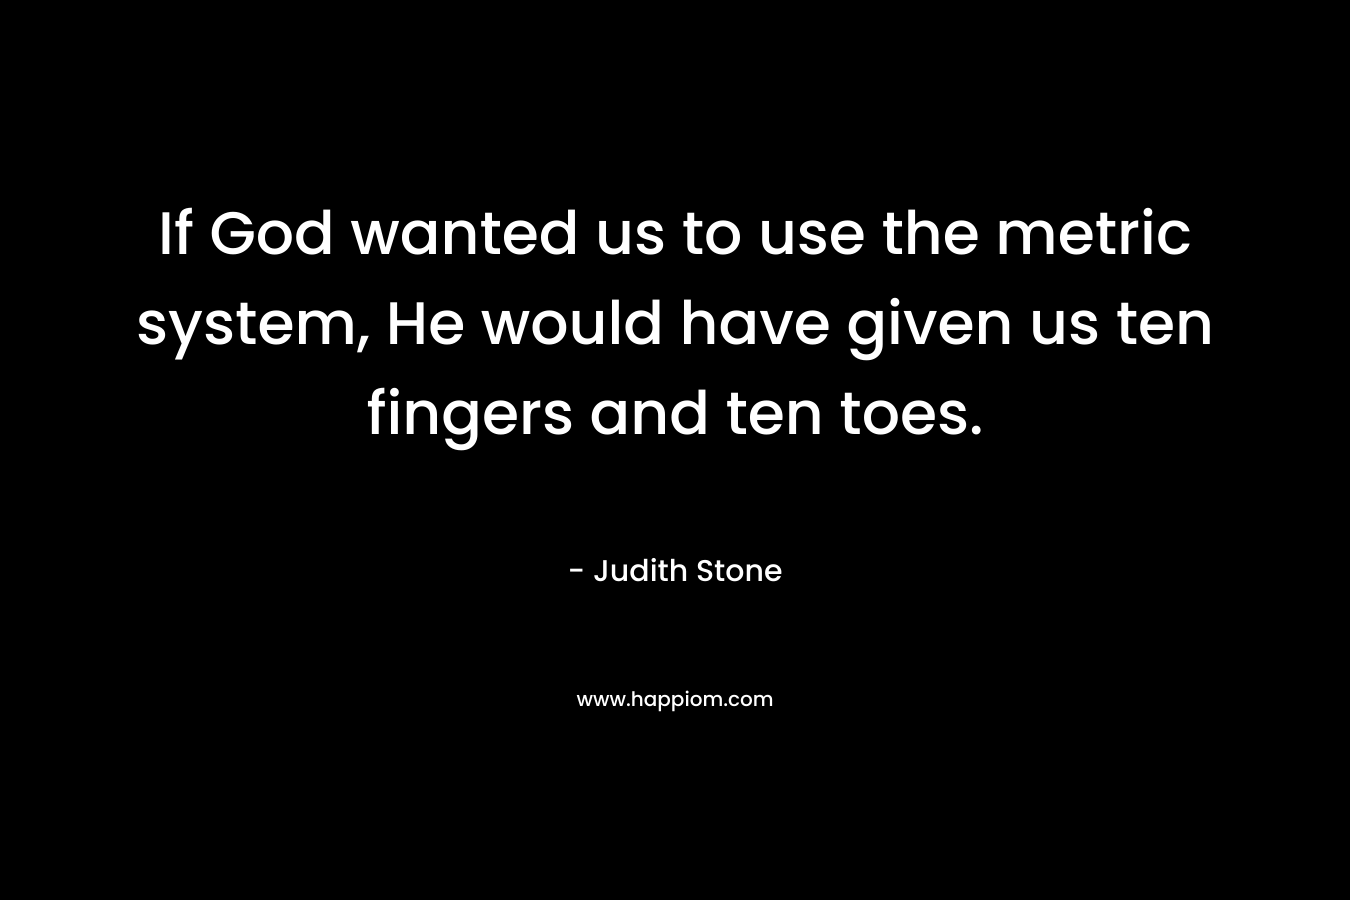 If God wanted us to use the metric system, He would have given us ten fingers and ten toes. – Judith Stone